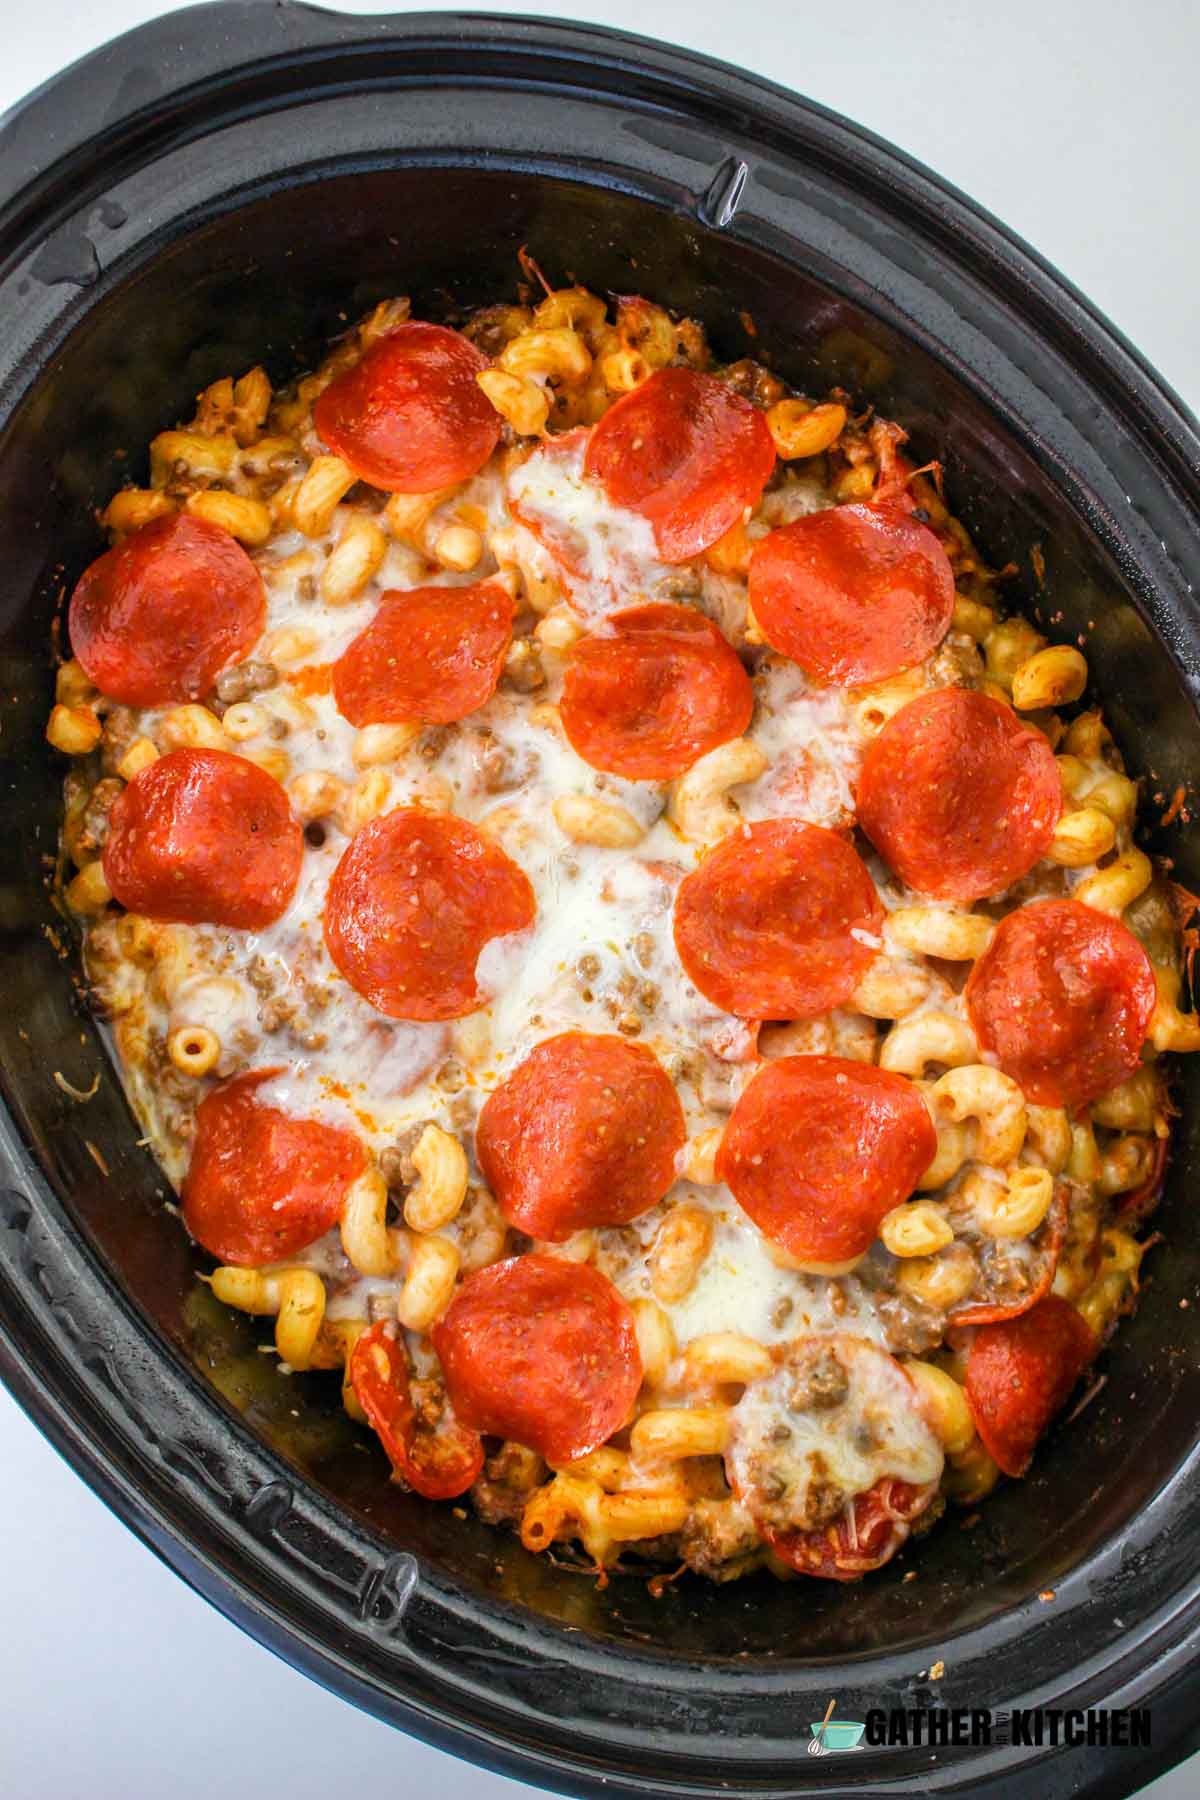 Freshly cooked pizza casserole in a slow cooker.